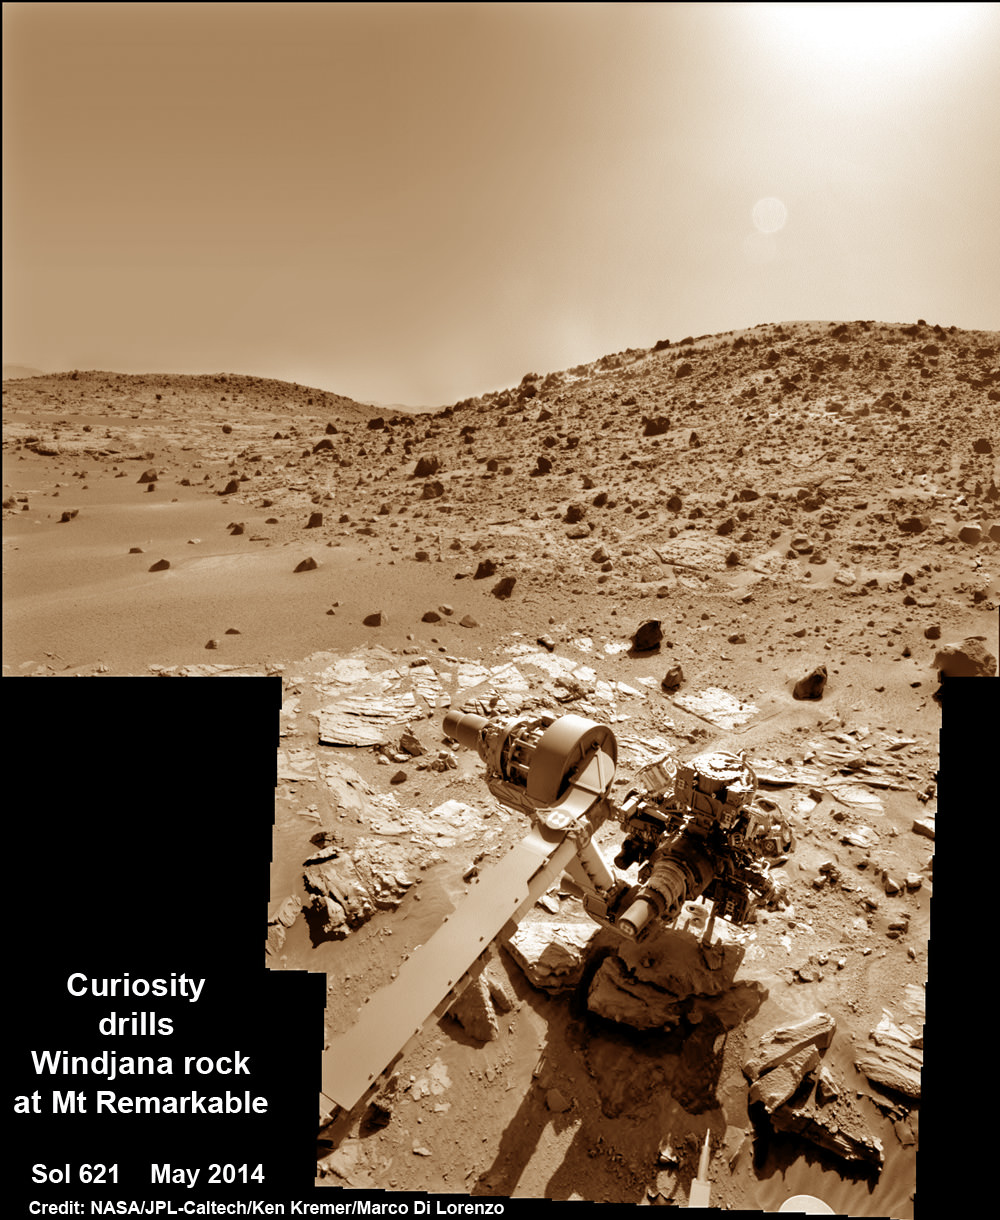 Composite photo mosaic shows deployment of NASA Curiosity rovers robotic arm and two holes after drilling into ‘Windjana’ sandstone rock on May 5, 2014, Sol 621, at Mount Remarkable as missions third drill target for sample analysis by rover’s chemistry labs.  The navcam raw images were stitched together from several Martian days up to Sol 621, May 5, 2014 and colorized.   Credit: NASA/JPL-Caltech/Ken Kremer - kenkremer.com/Marco Di Lorenzo 